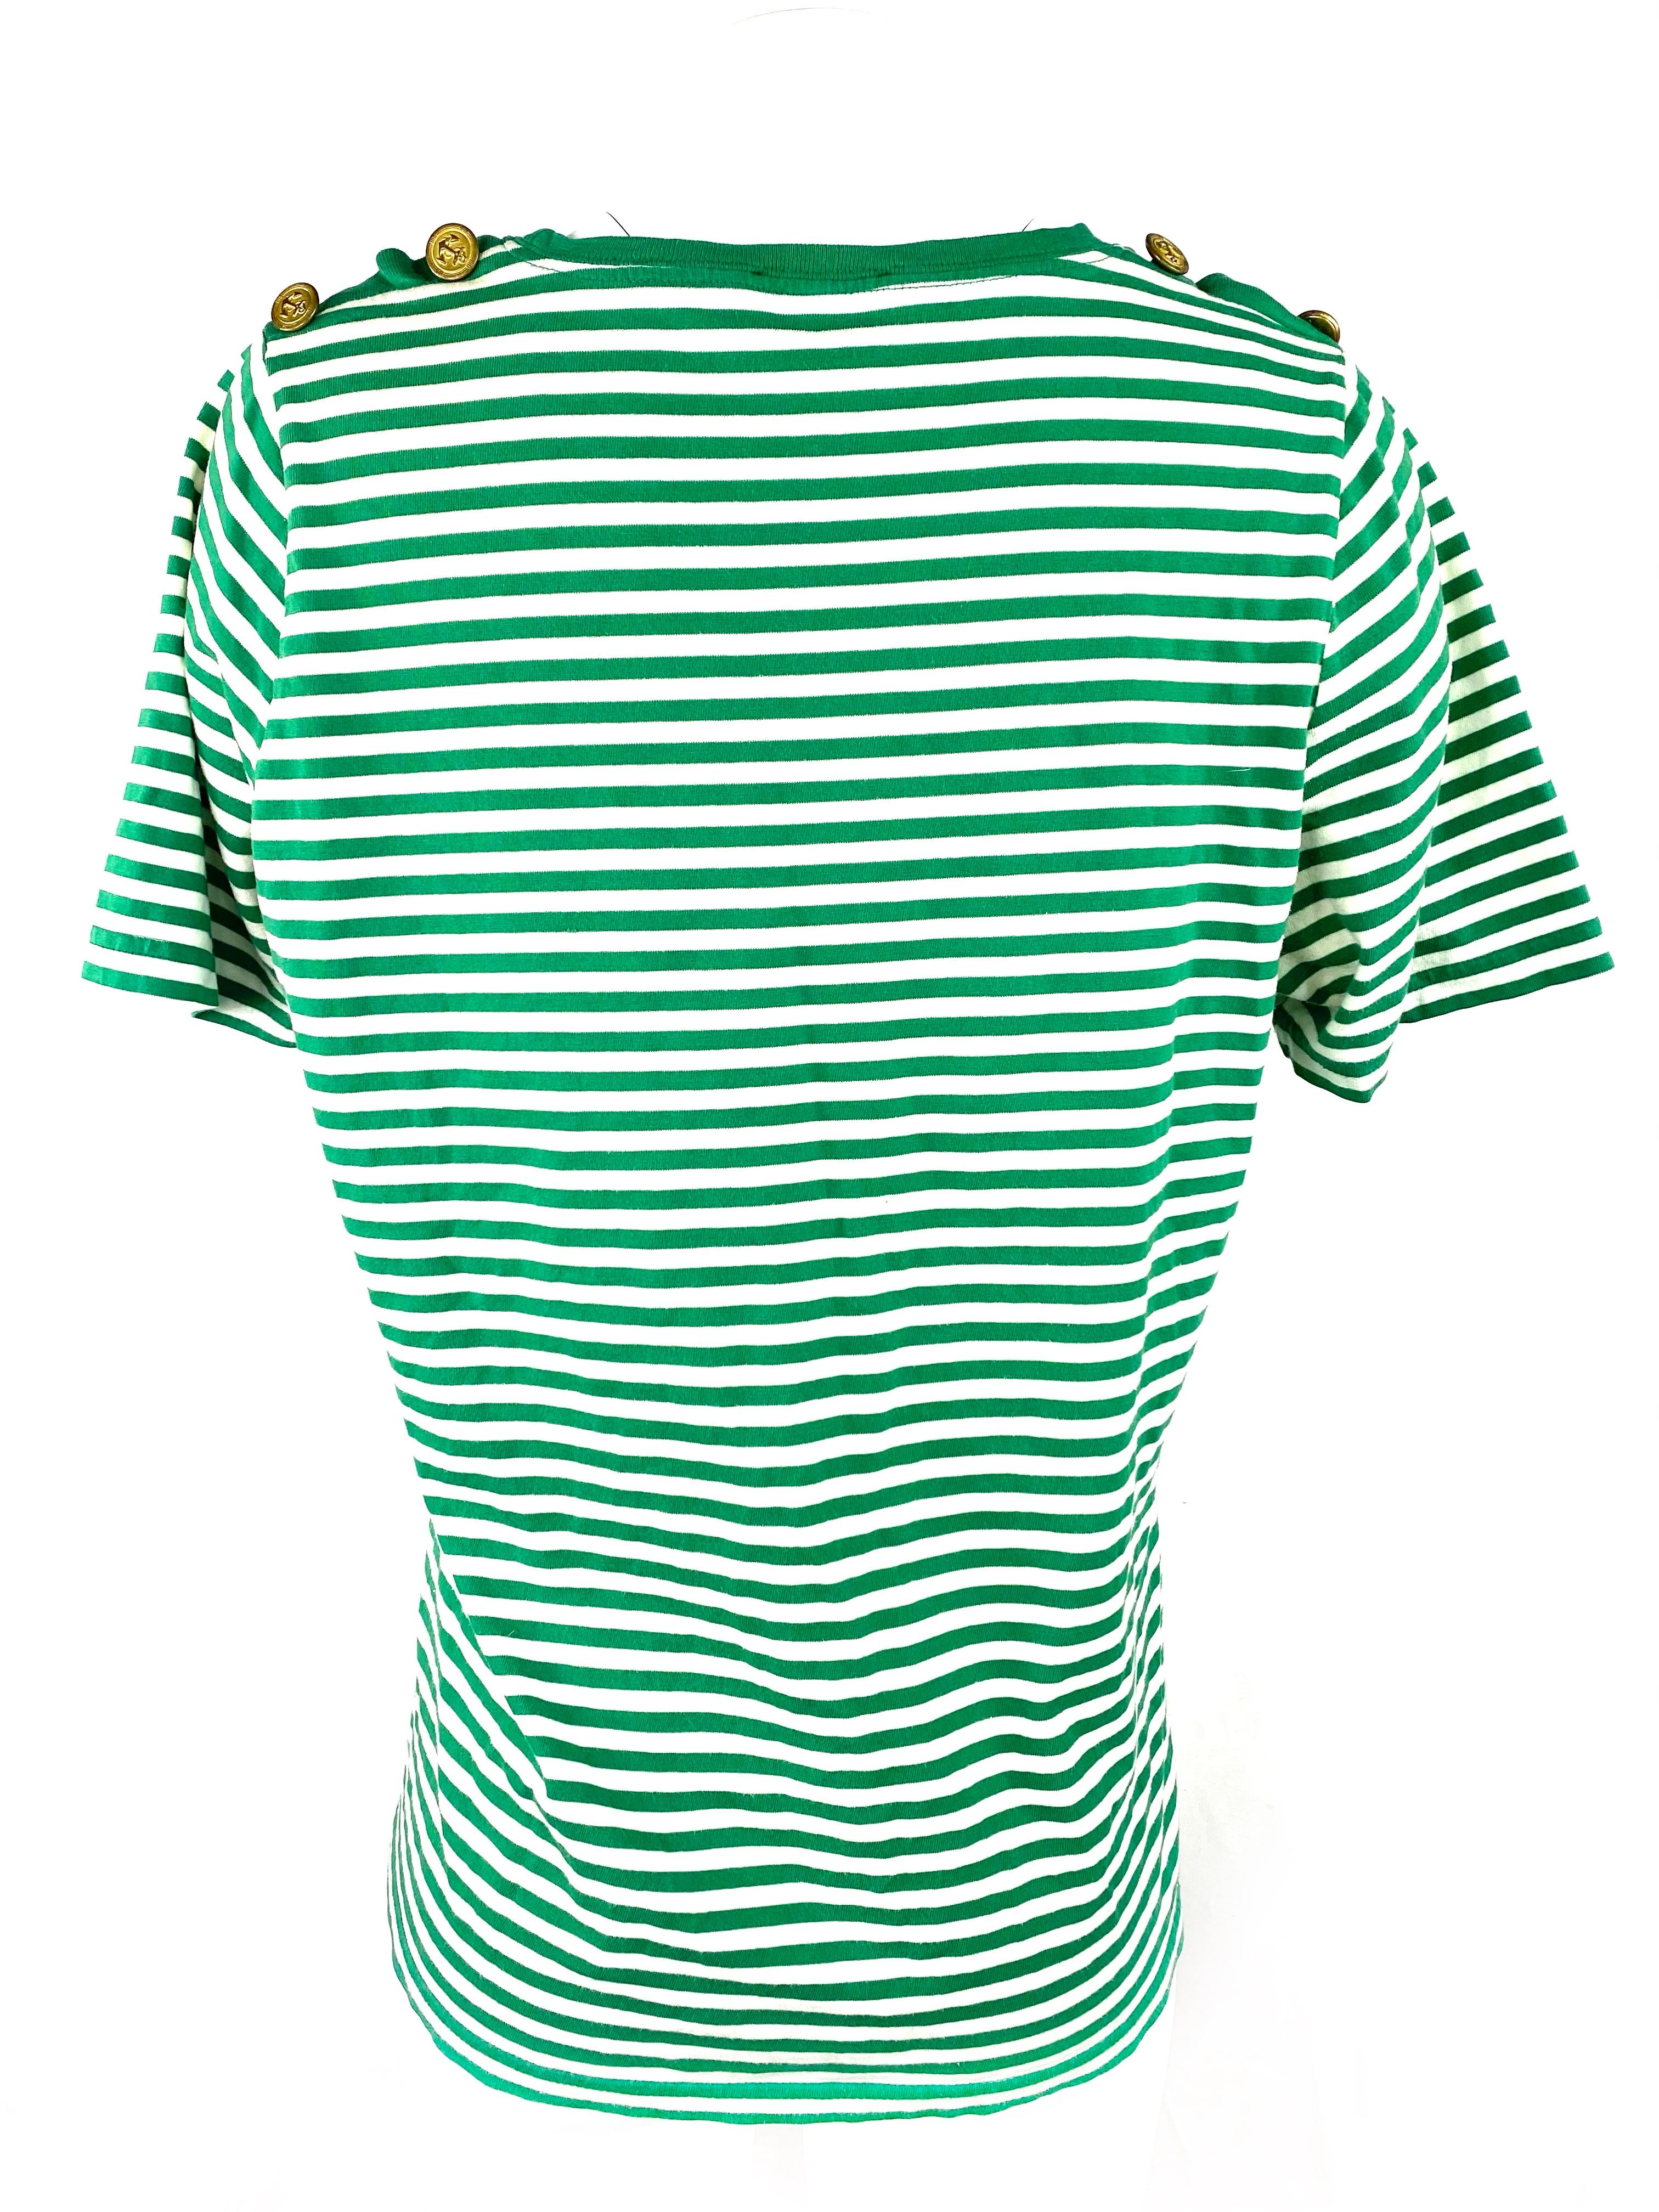 green and white striped t shirt